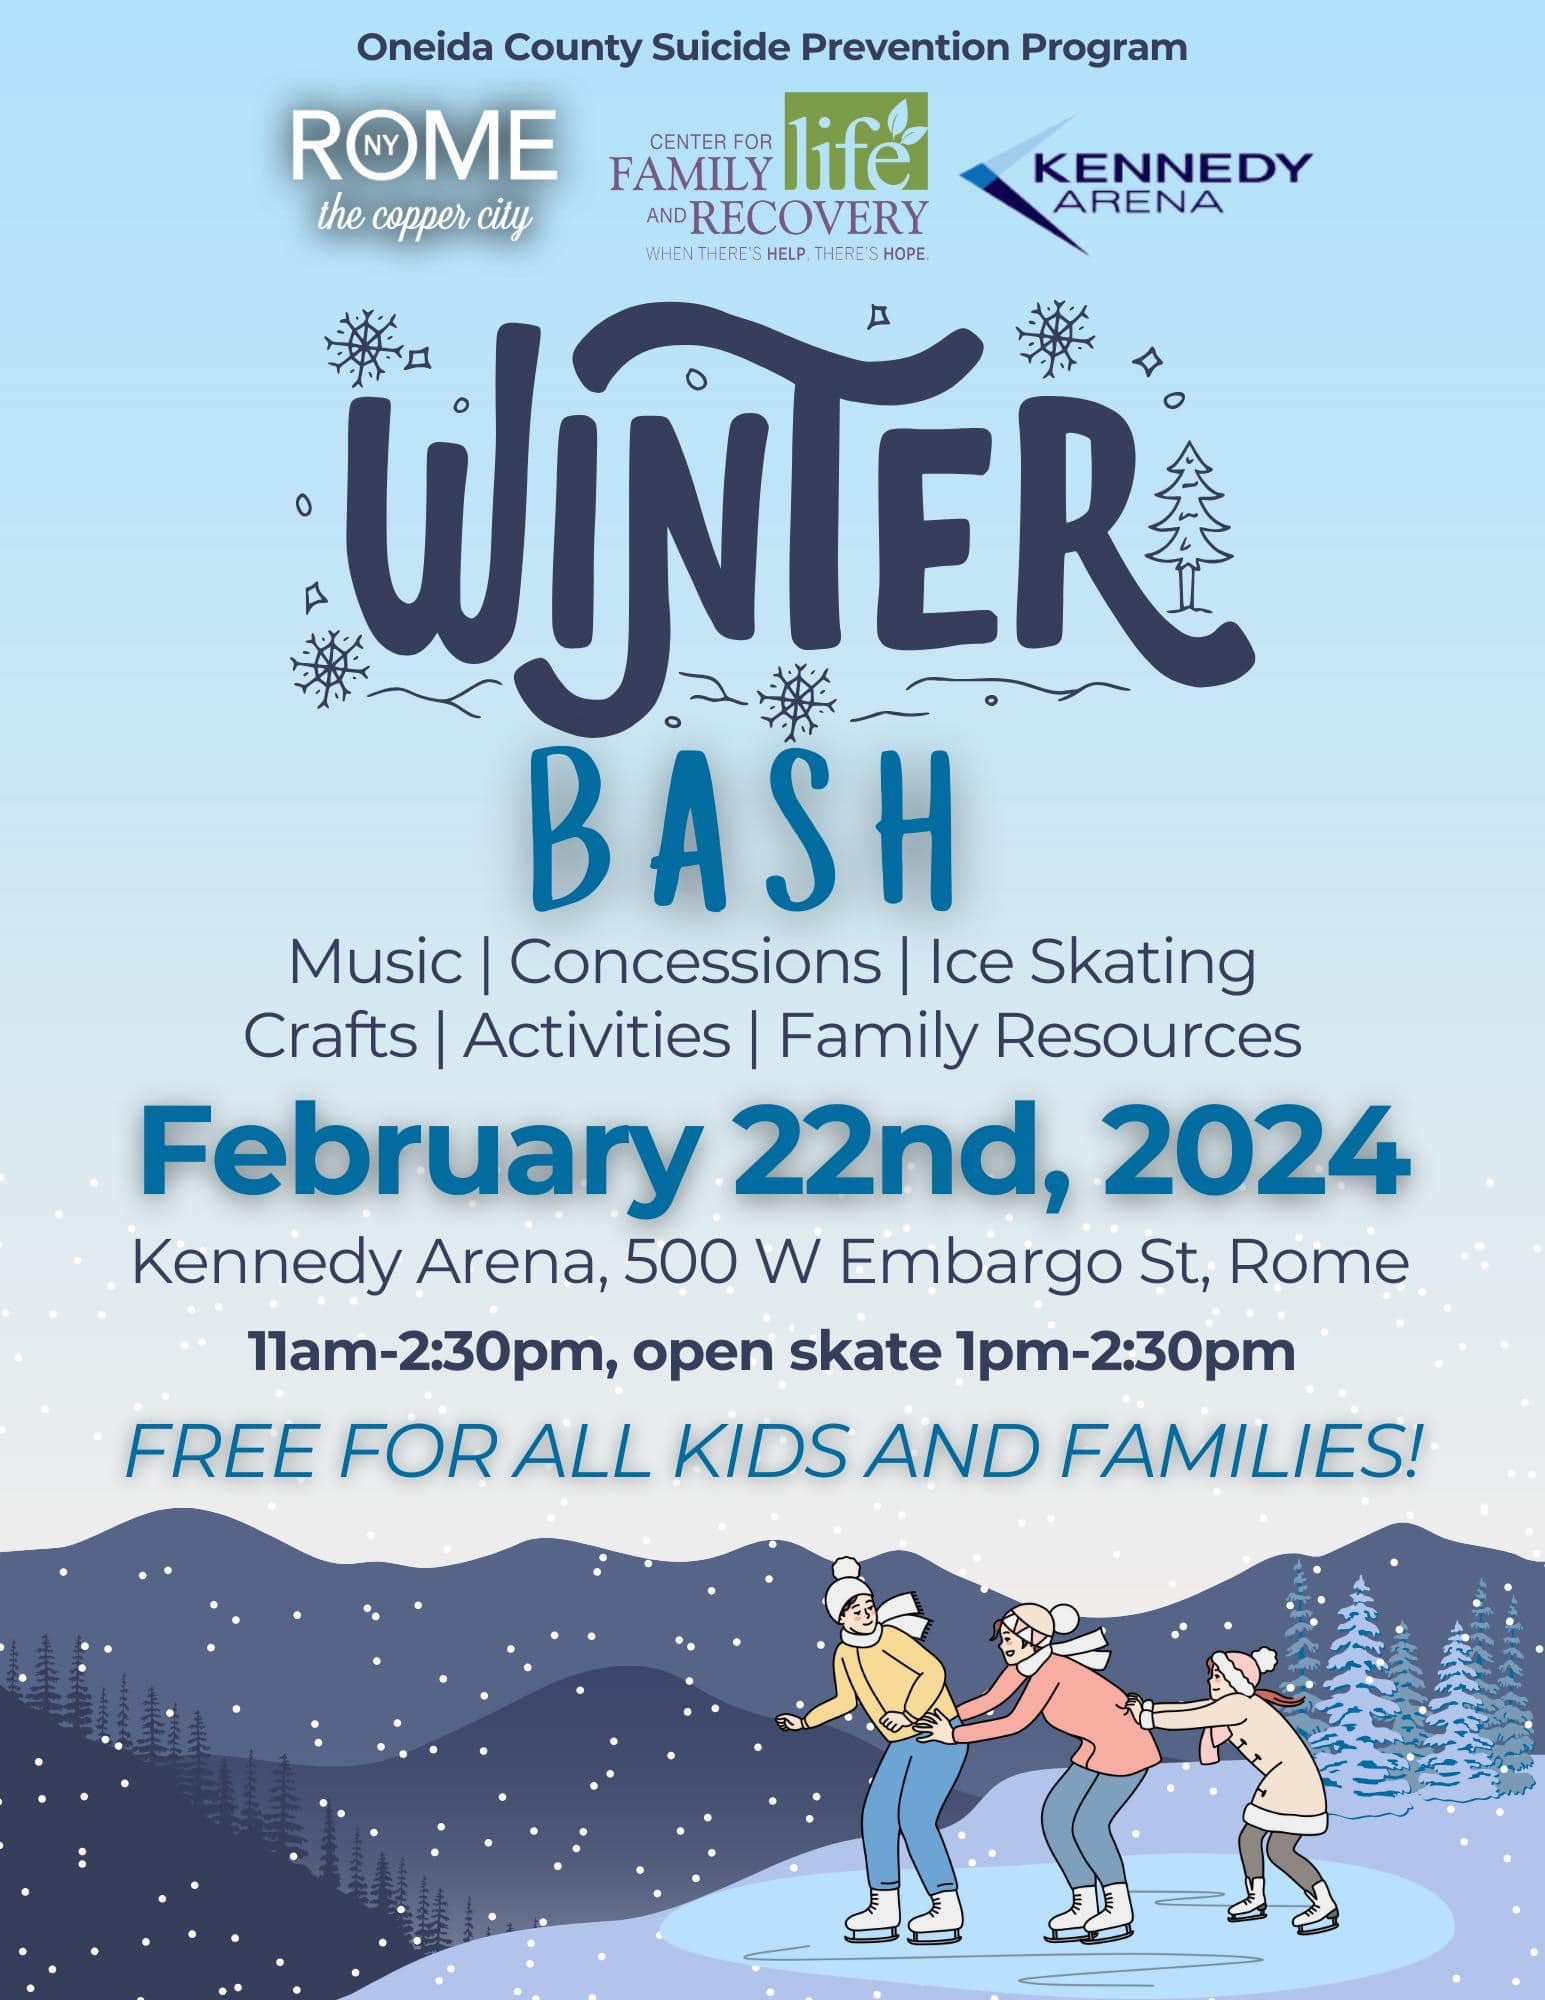 CFLR and City of Rome to Host Second “Winter Bash” in Rome During February School Break